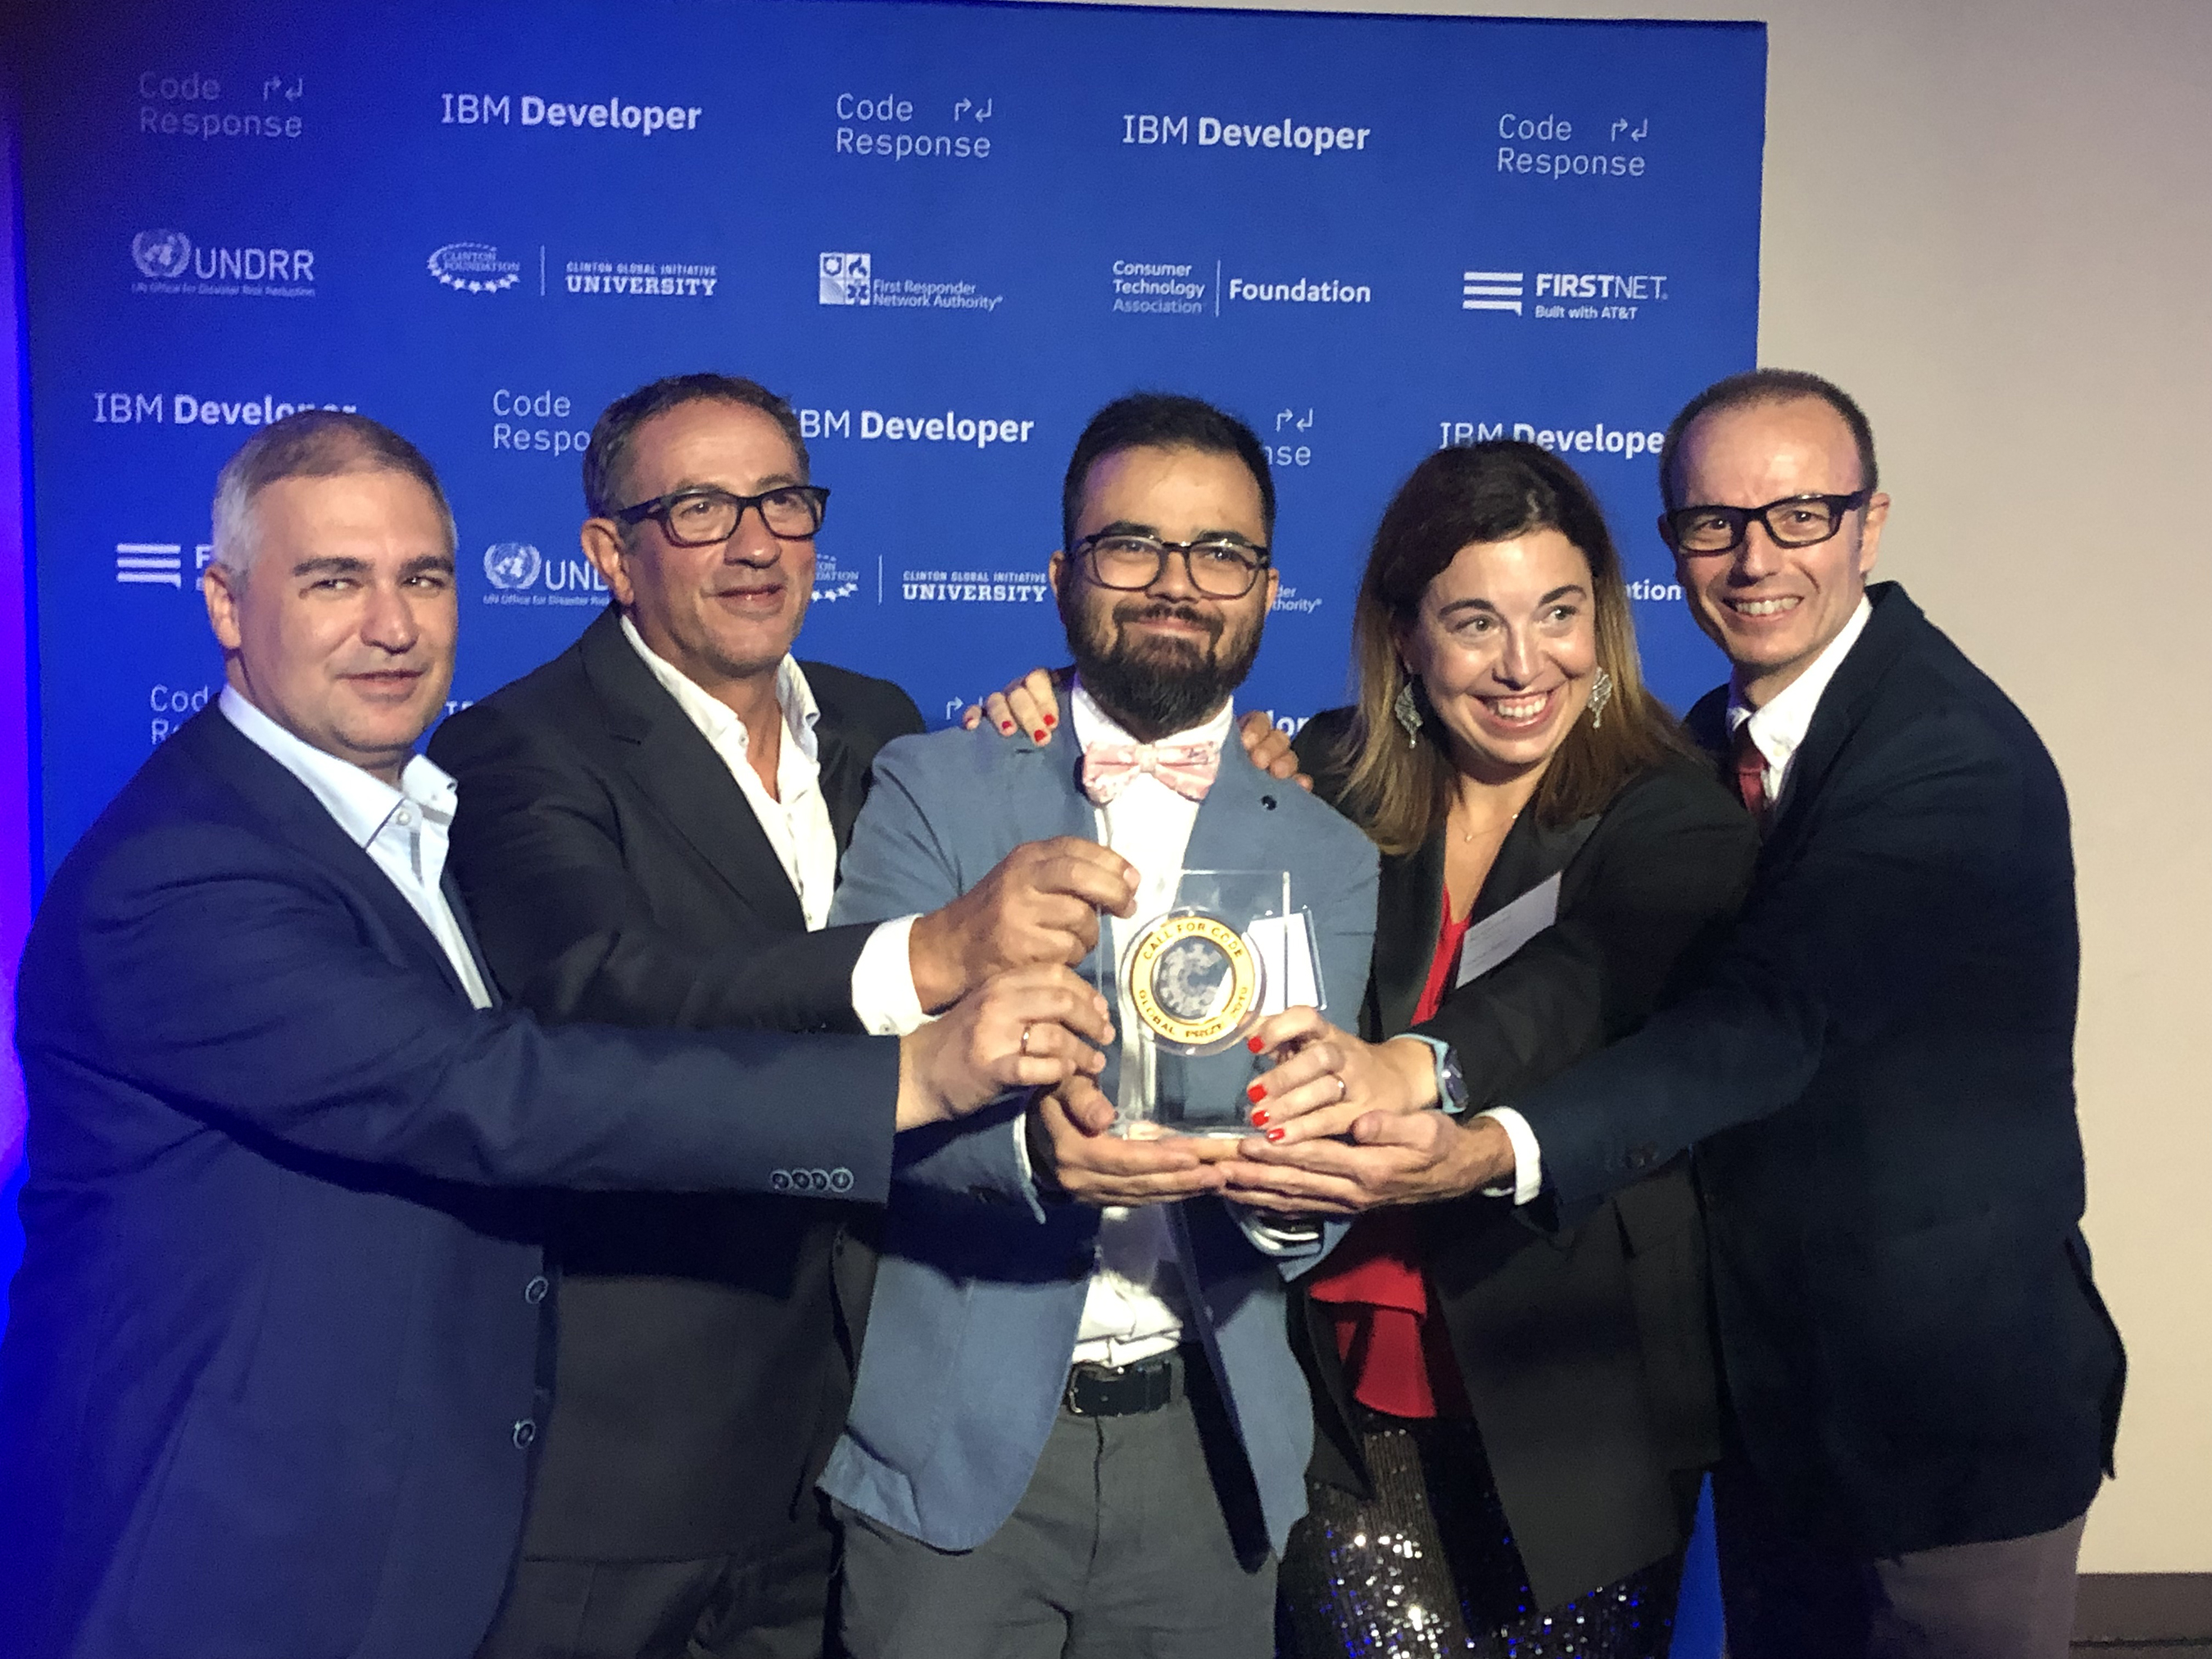 Prometeo won the 2019 Call for Code Global Challenge.